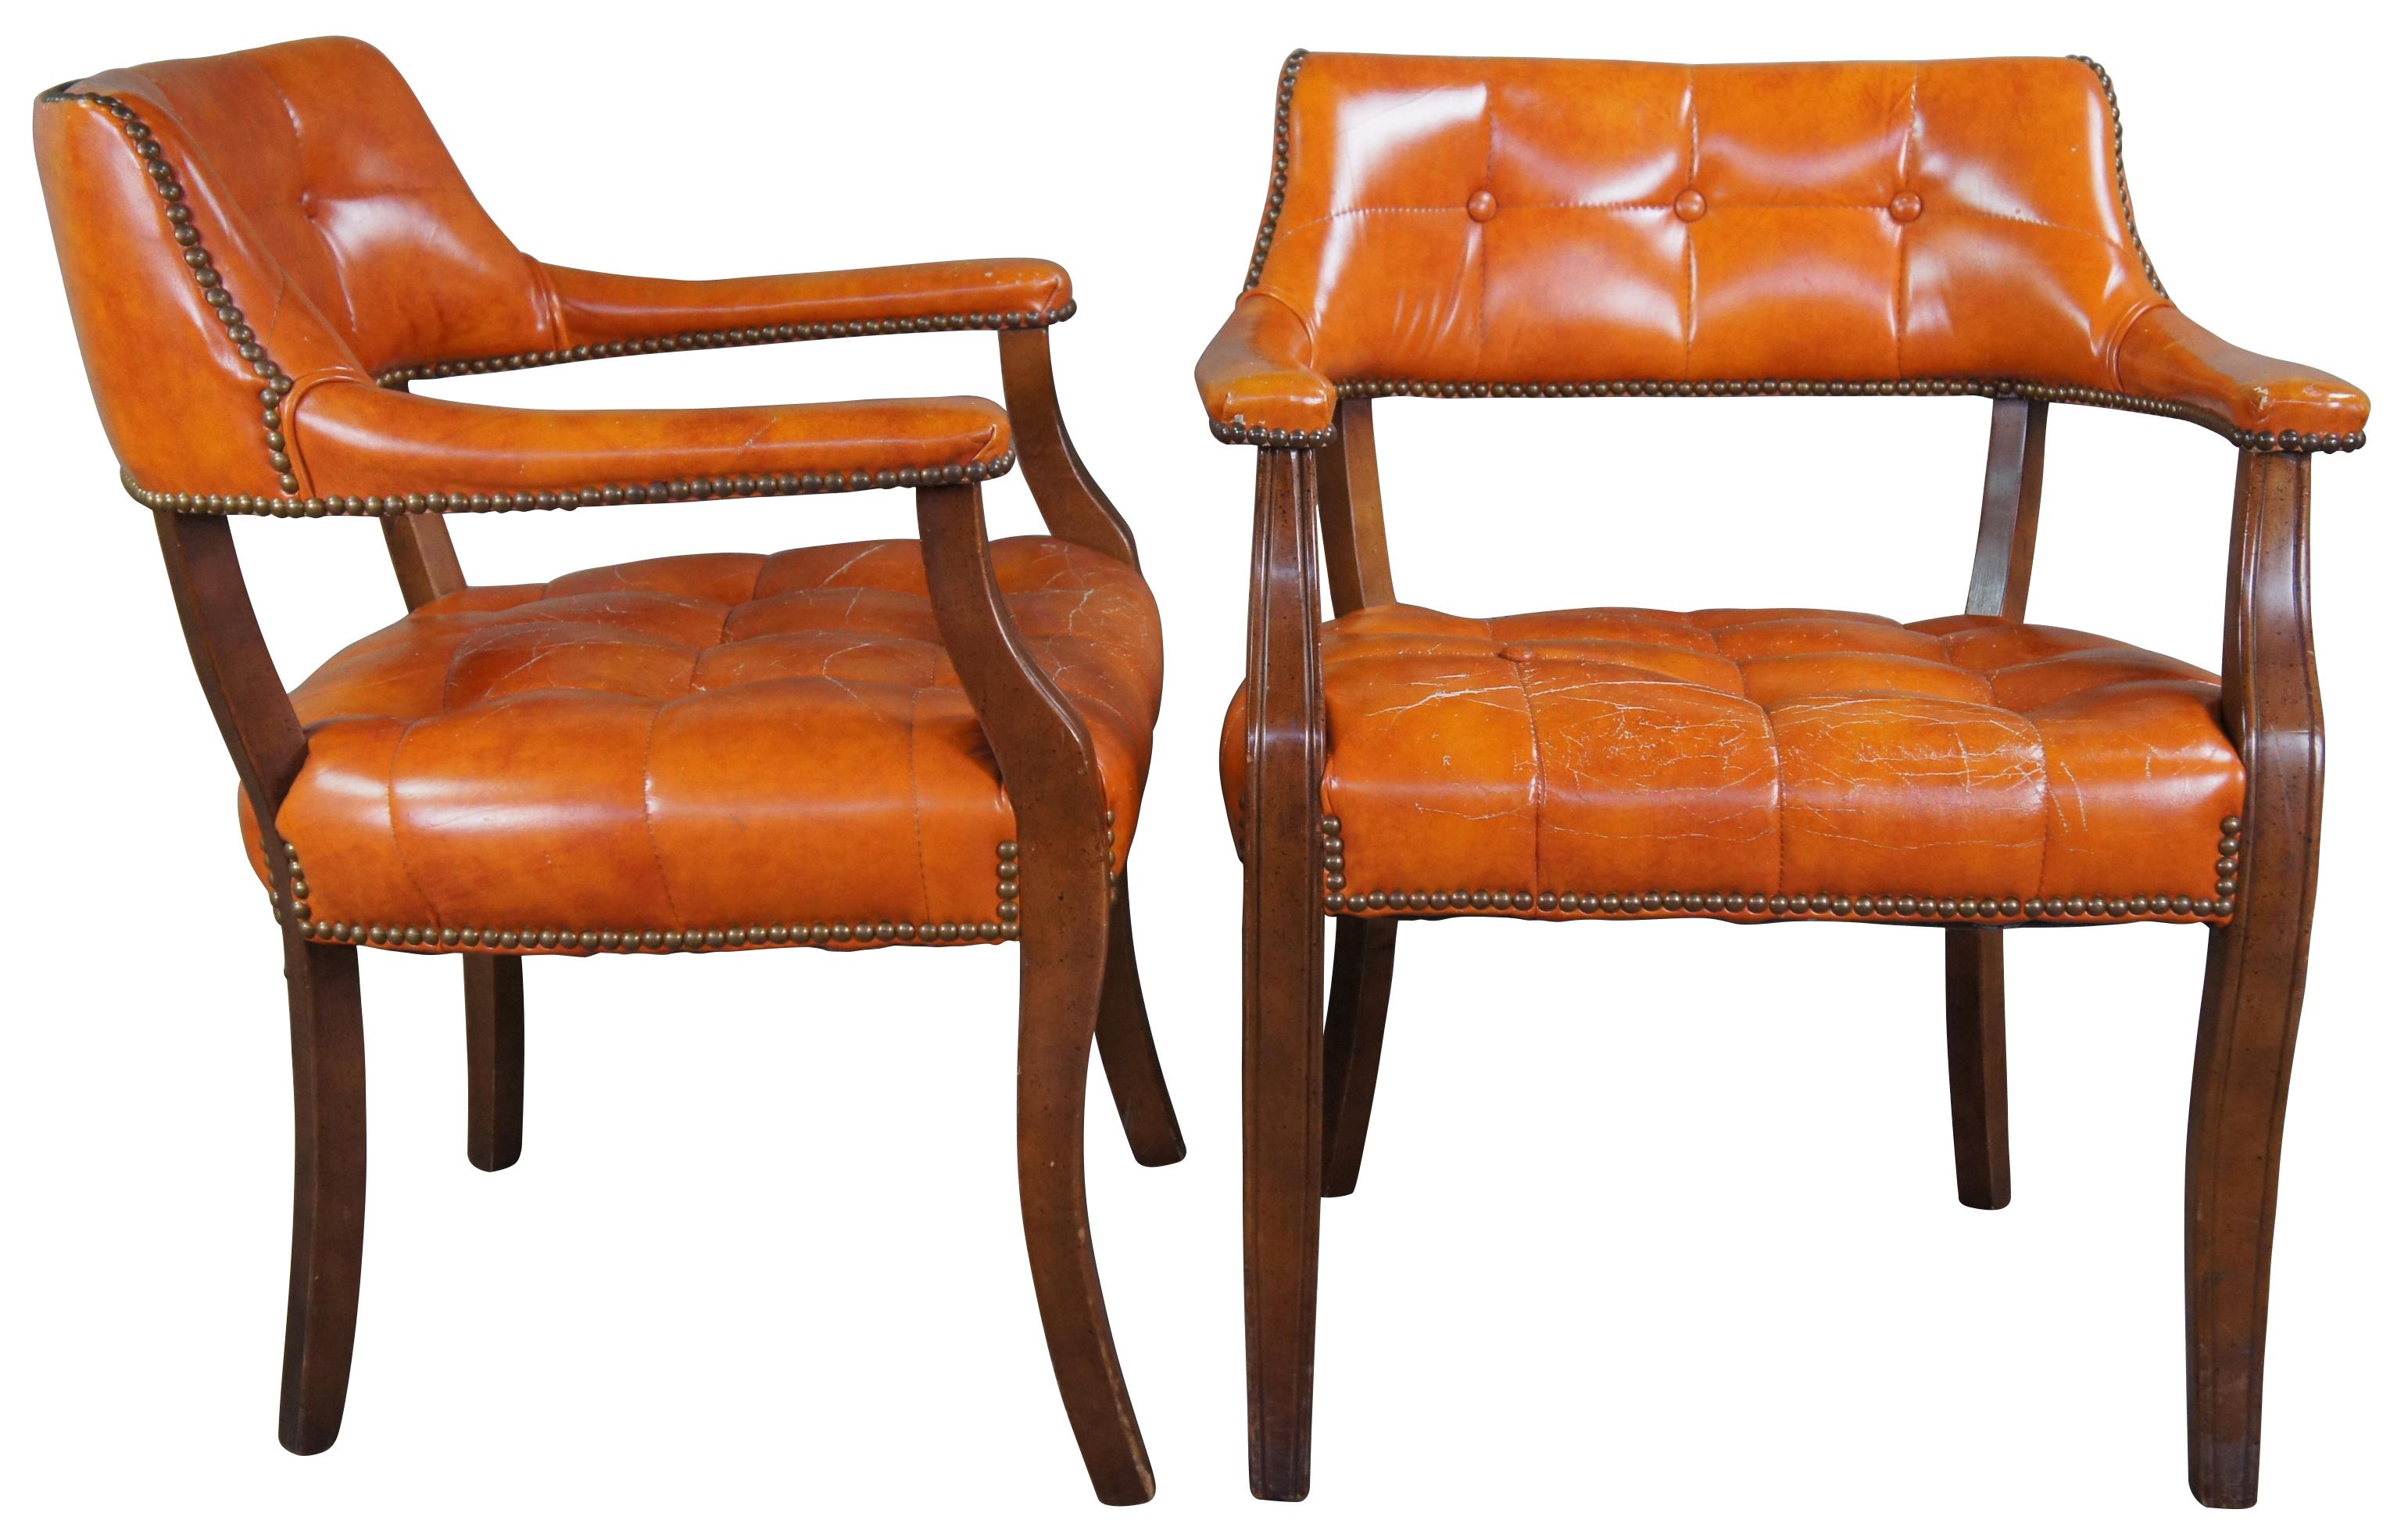 Pair of mid century orange vinyl tufted barrek back chairs. Features a a naturally distressed frame and brass nailhead trim.
 